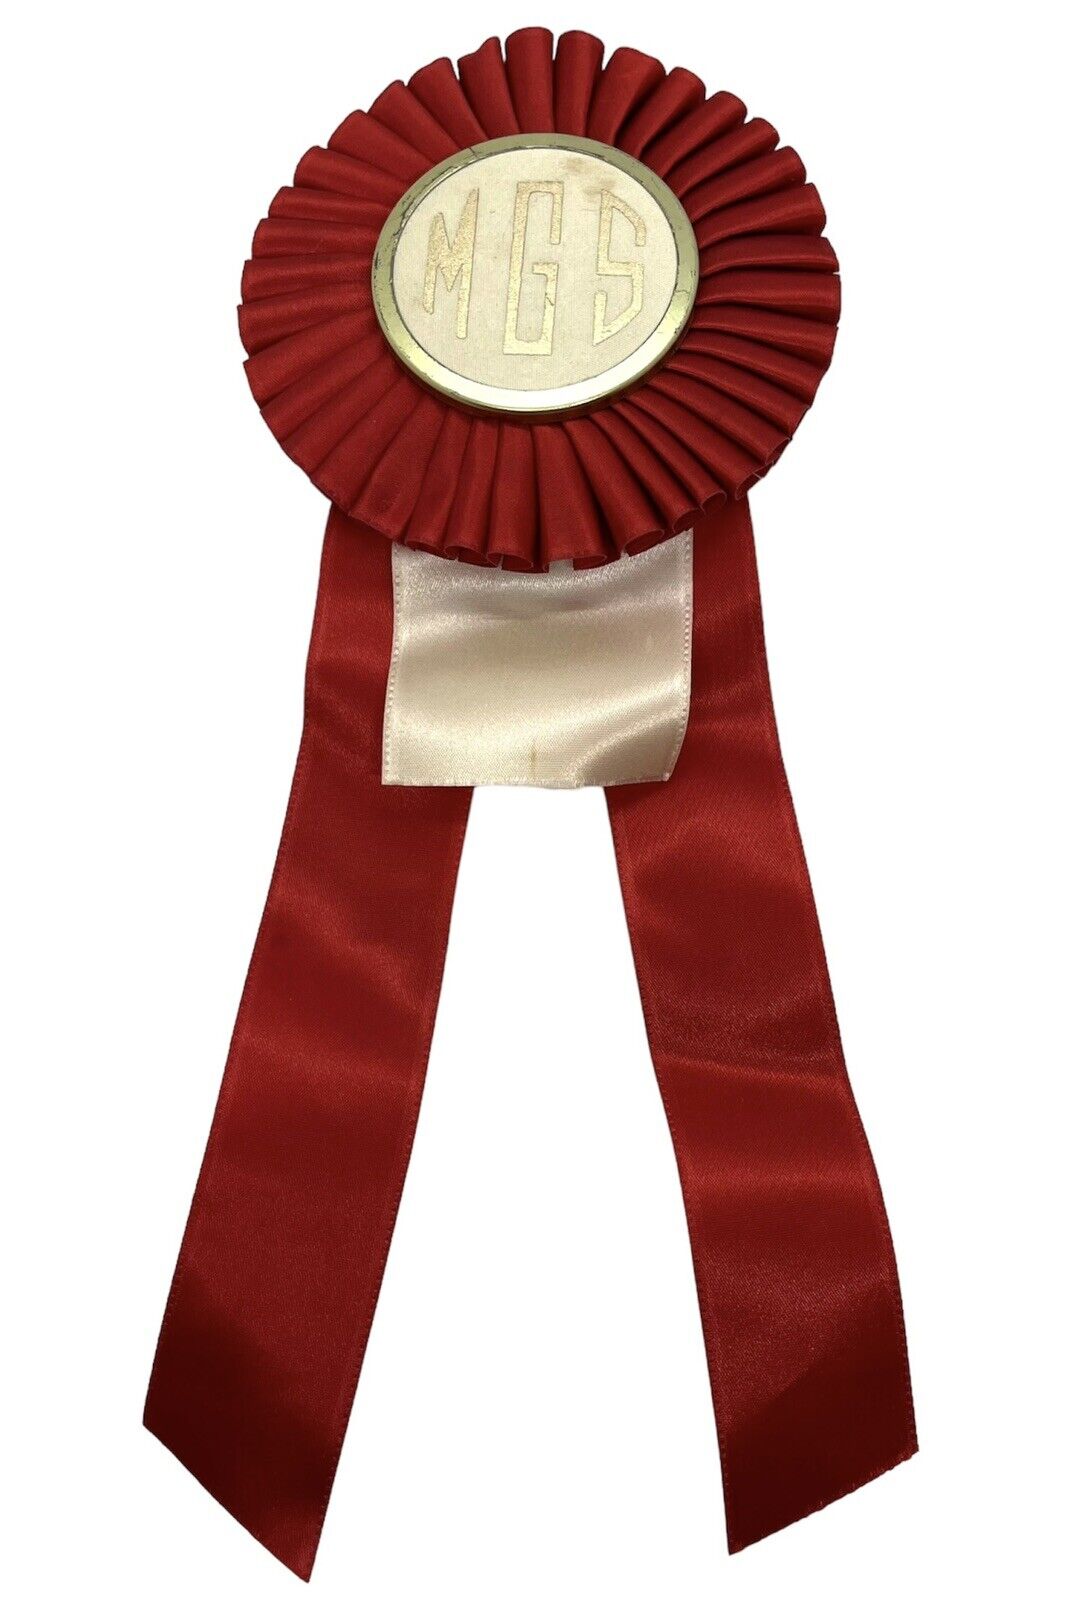 Vintage 1970’s County State Fair Horse Competition Ribbon Award